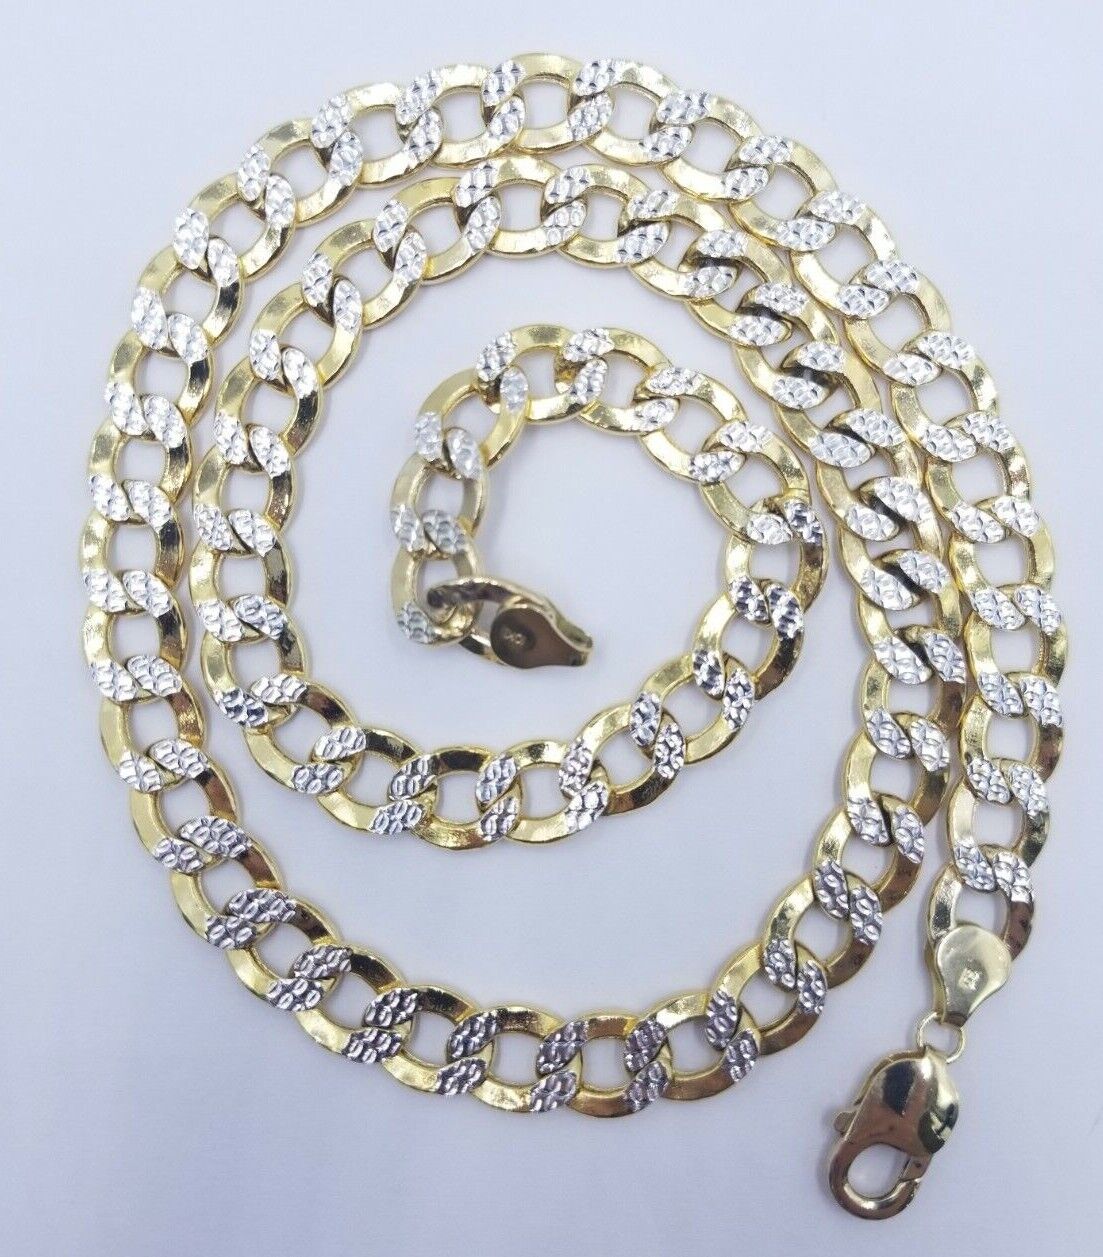 10MM Real Gold Mens Necklace Cuban Link 20-28" Diamond Cut 10k Yellow Gold Chain